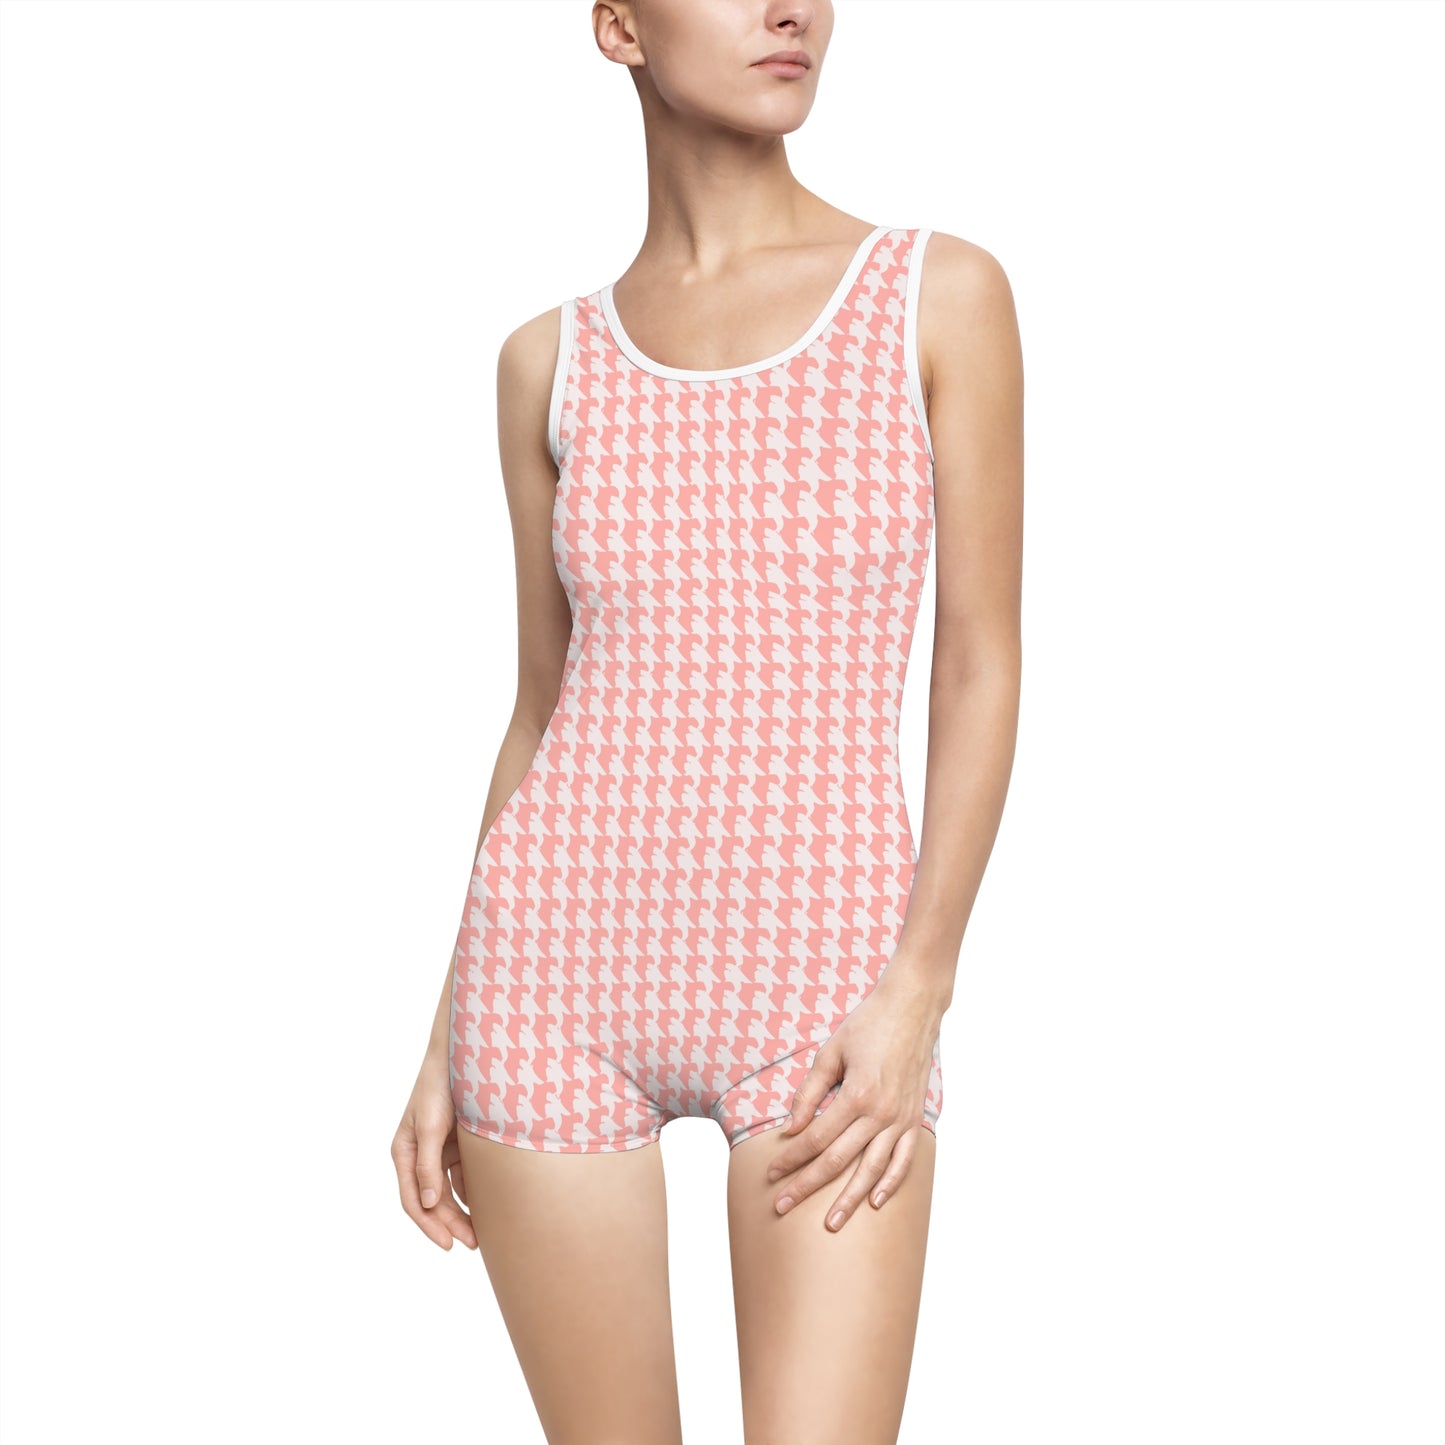 Vampire Art Coral Pink and White Houndstooth Grunge Retro Women's Vintage Swimsuit